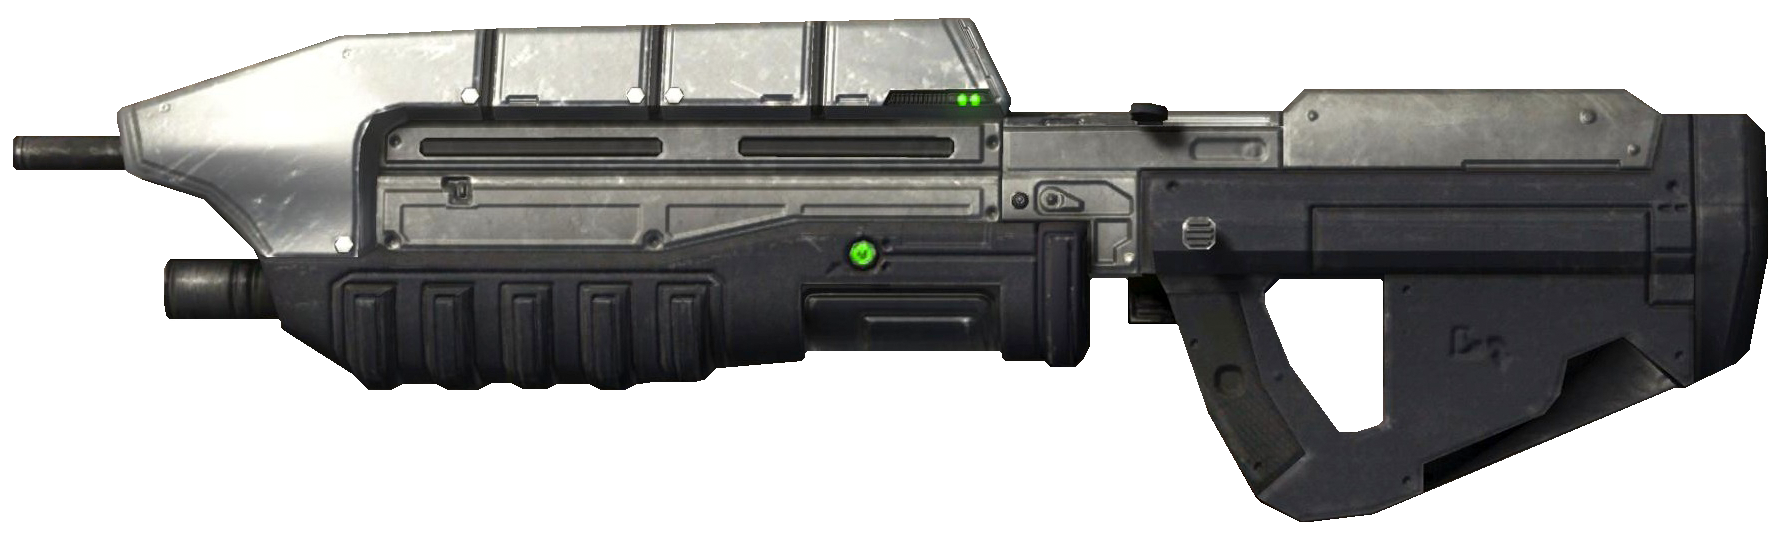 Image result for halo assault rifle